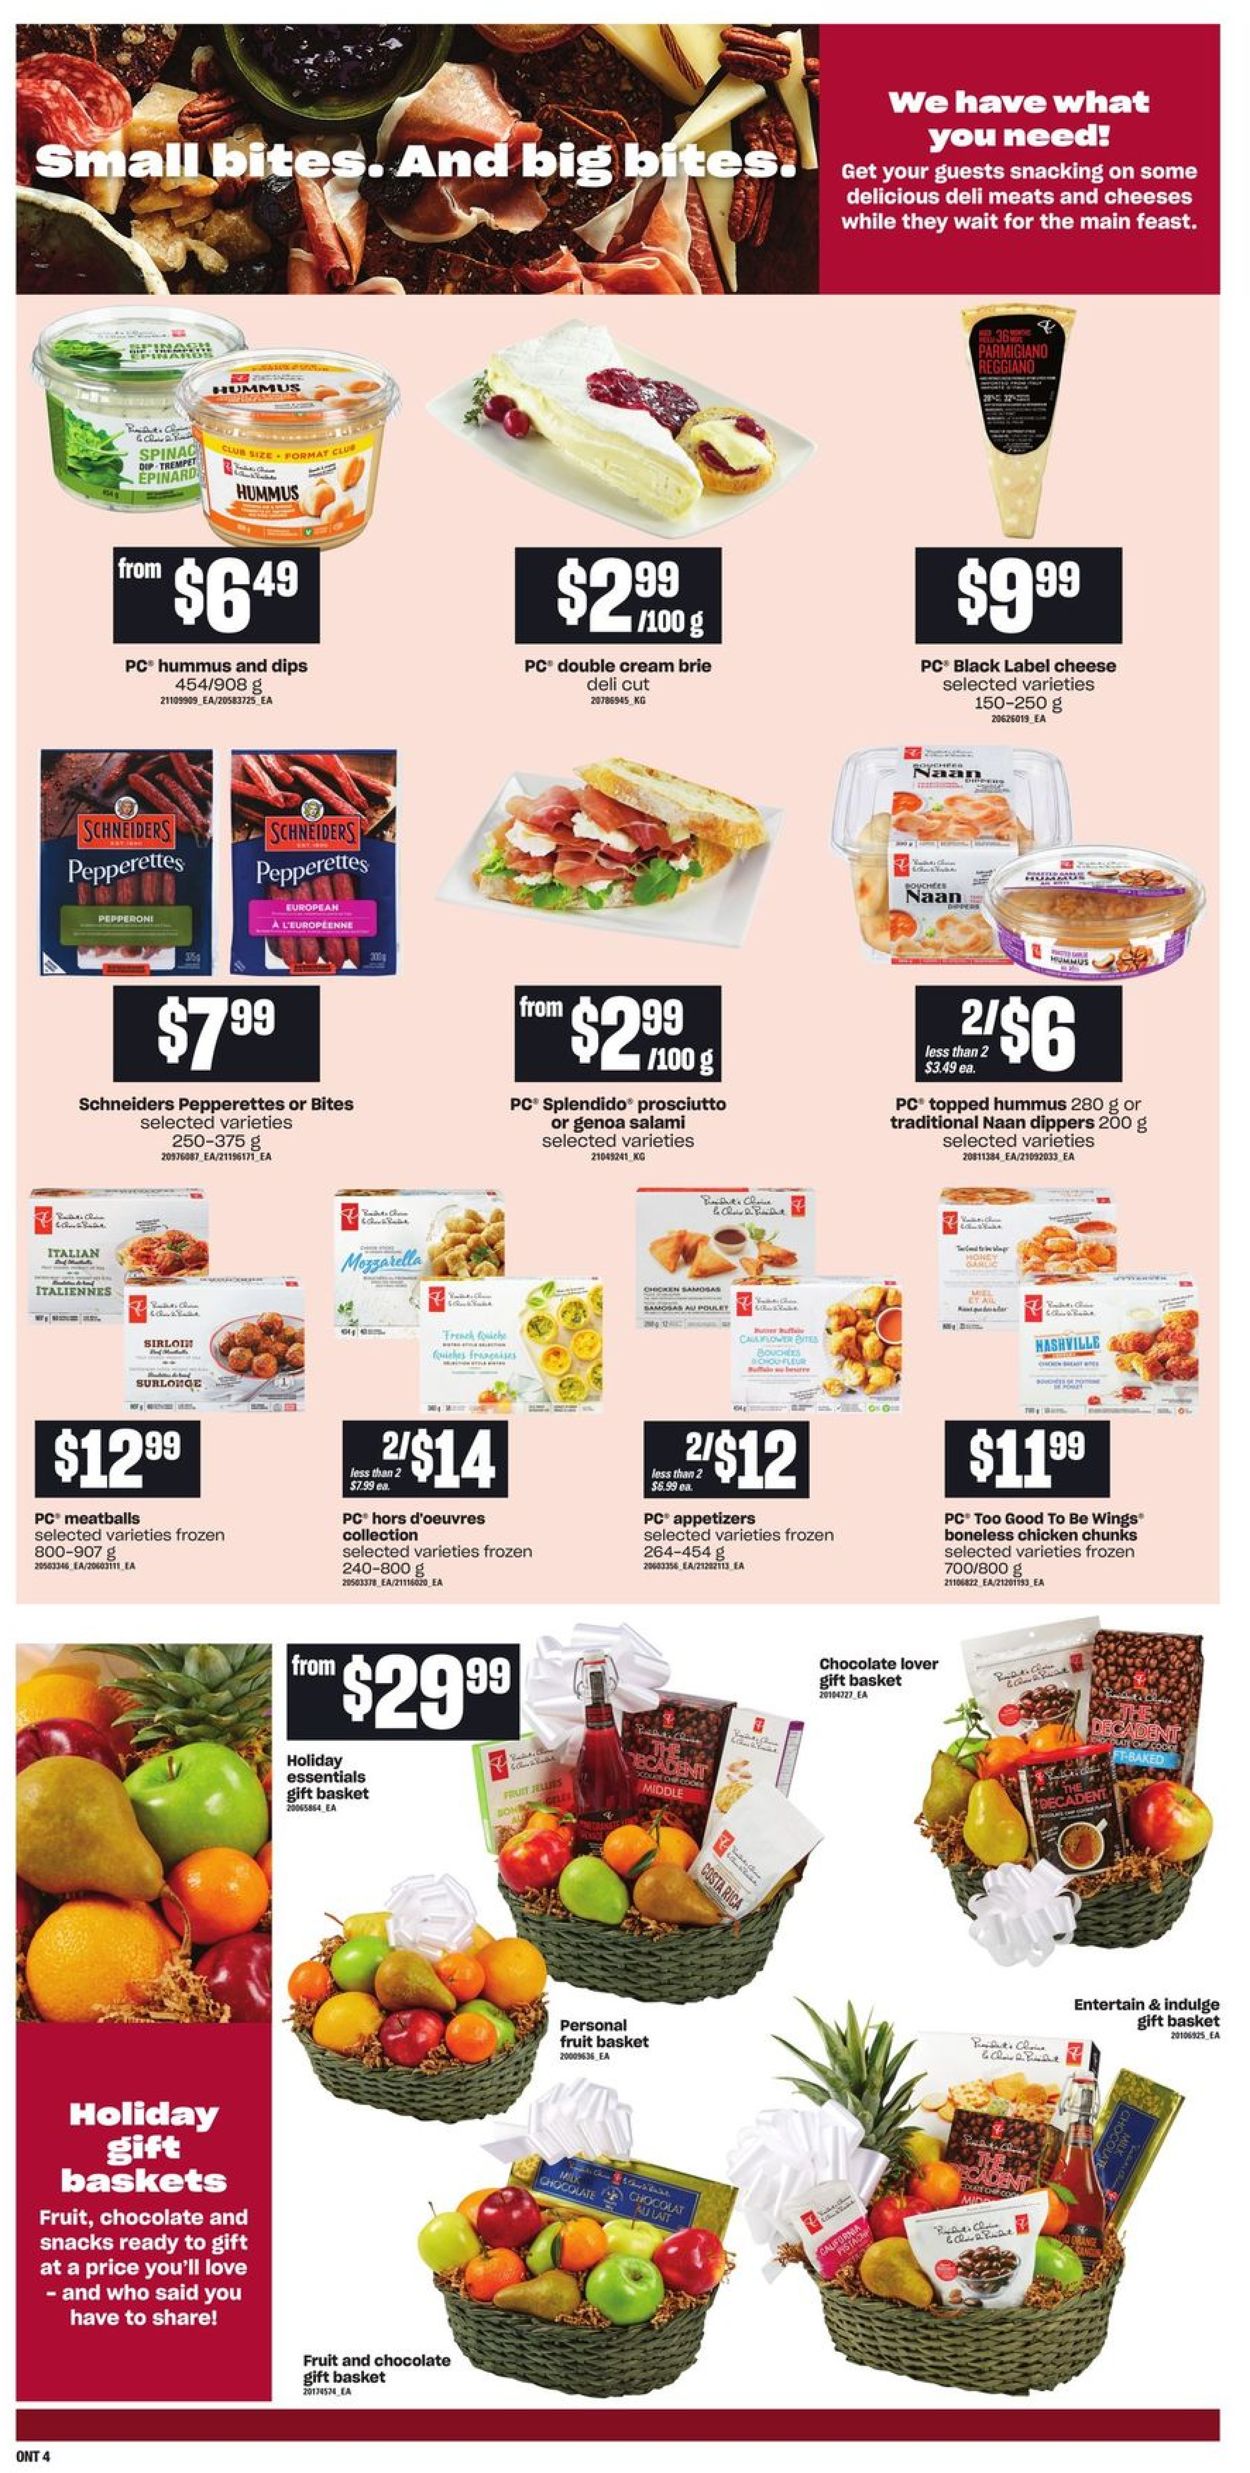 Zehrs Flyer from 12/22/2021